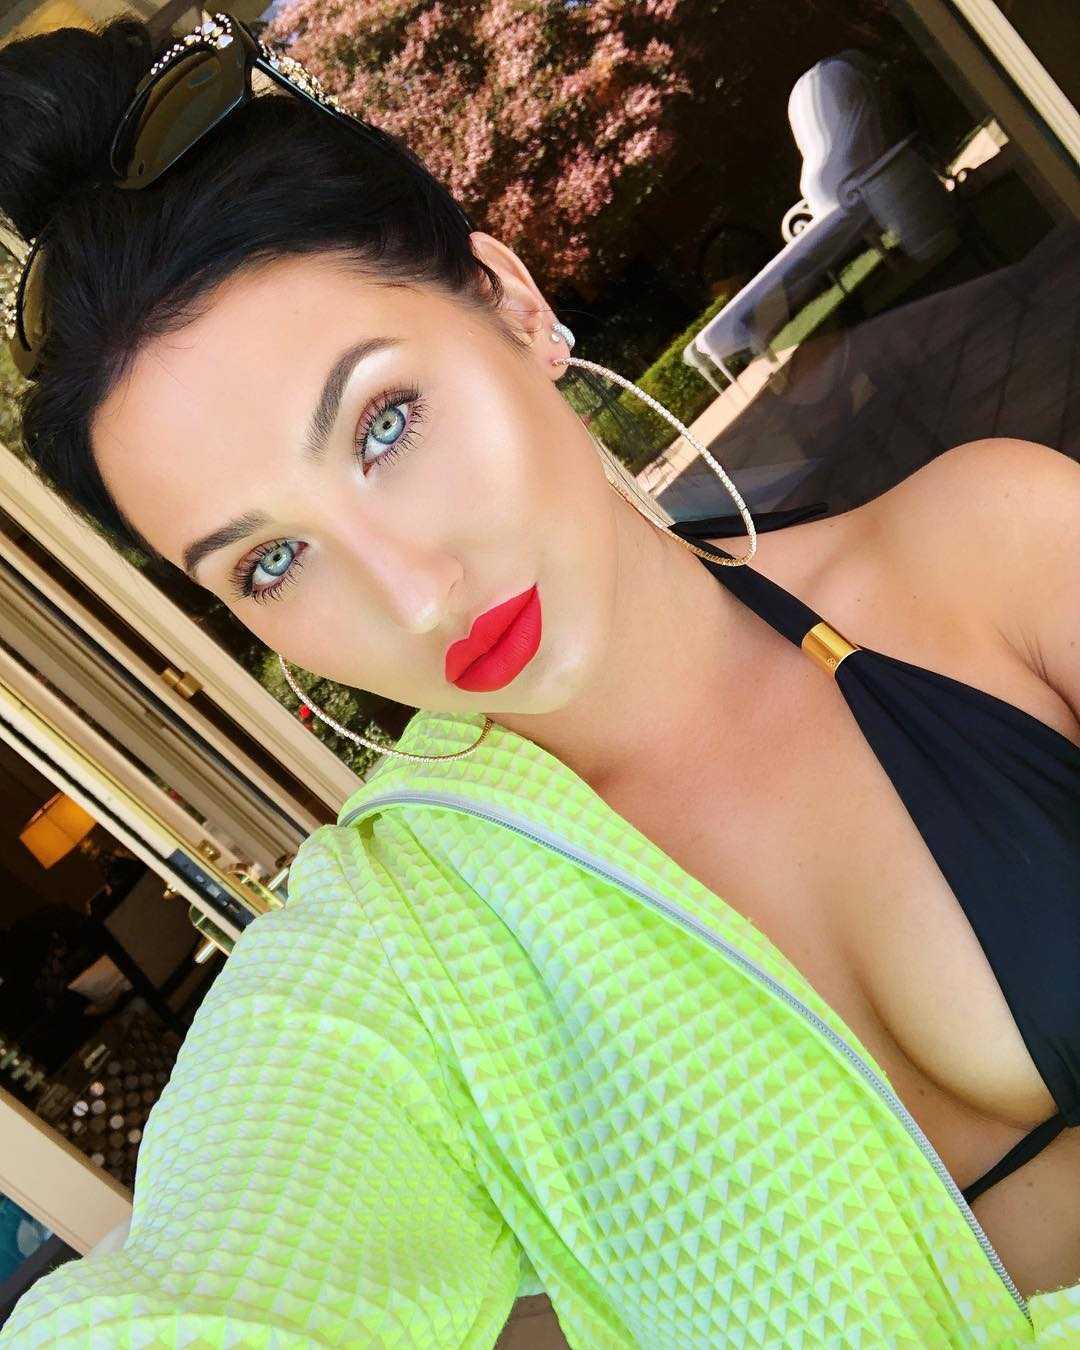 51 Sexy Jaclyn Hill Boobs Pictures Will Induce Passionate Feelings for Her 163